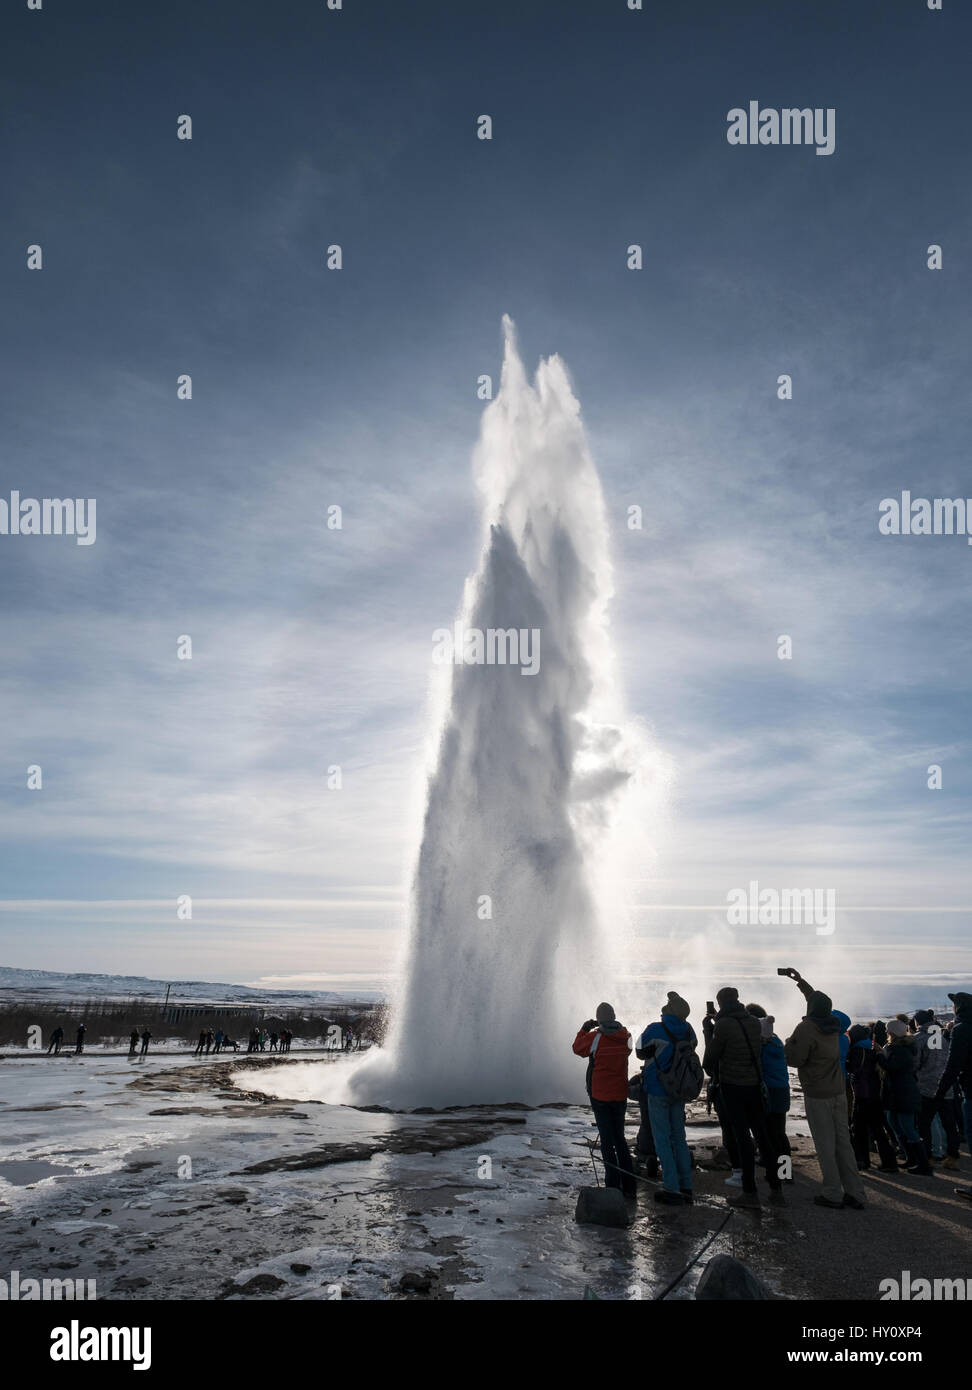 STROKKUR, ICELAND - 1 MAR - Groups of tourist watching natural fountain geyser in holidays at Strkkur, Iceland on 1 March, 2017 Stock Photo